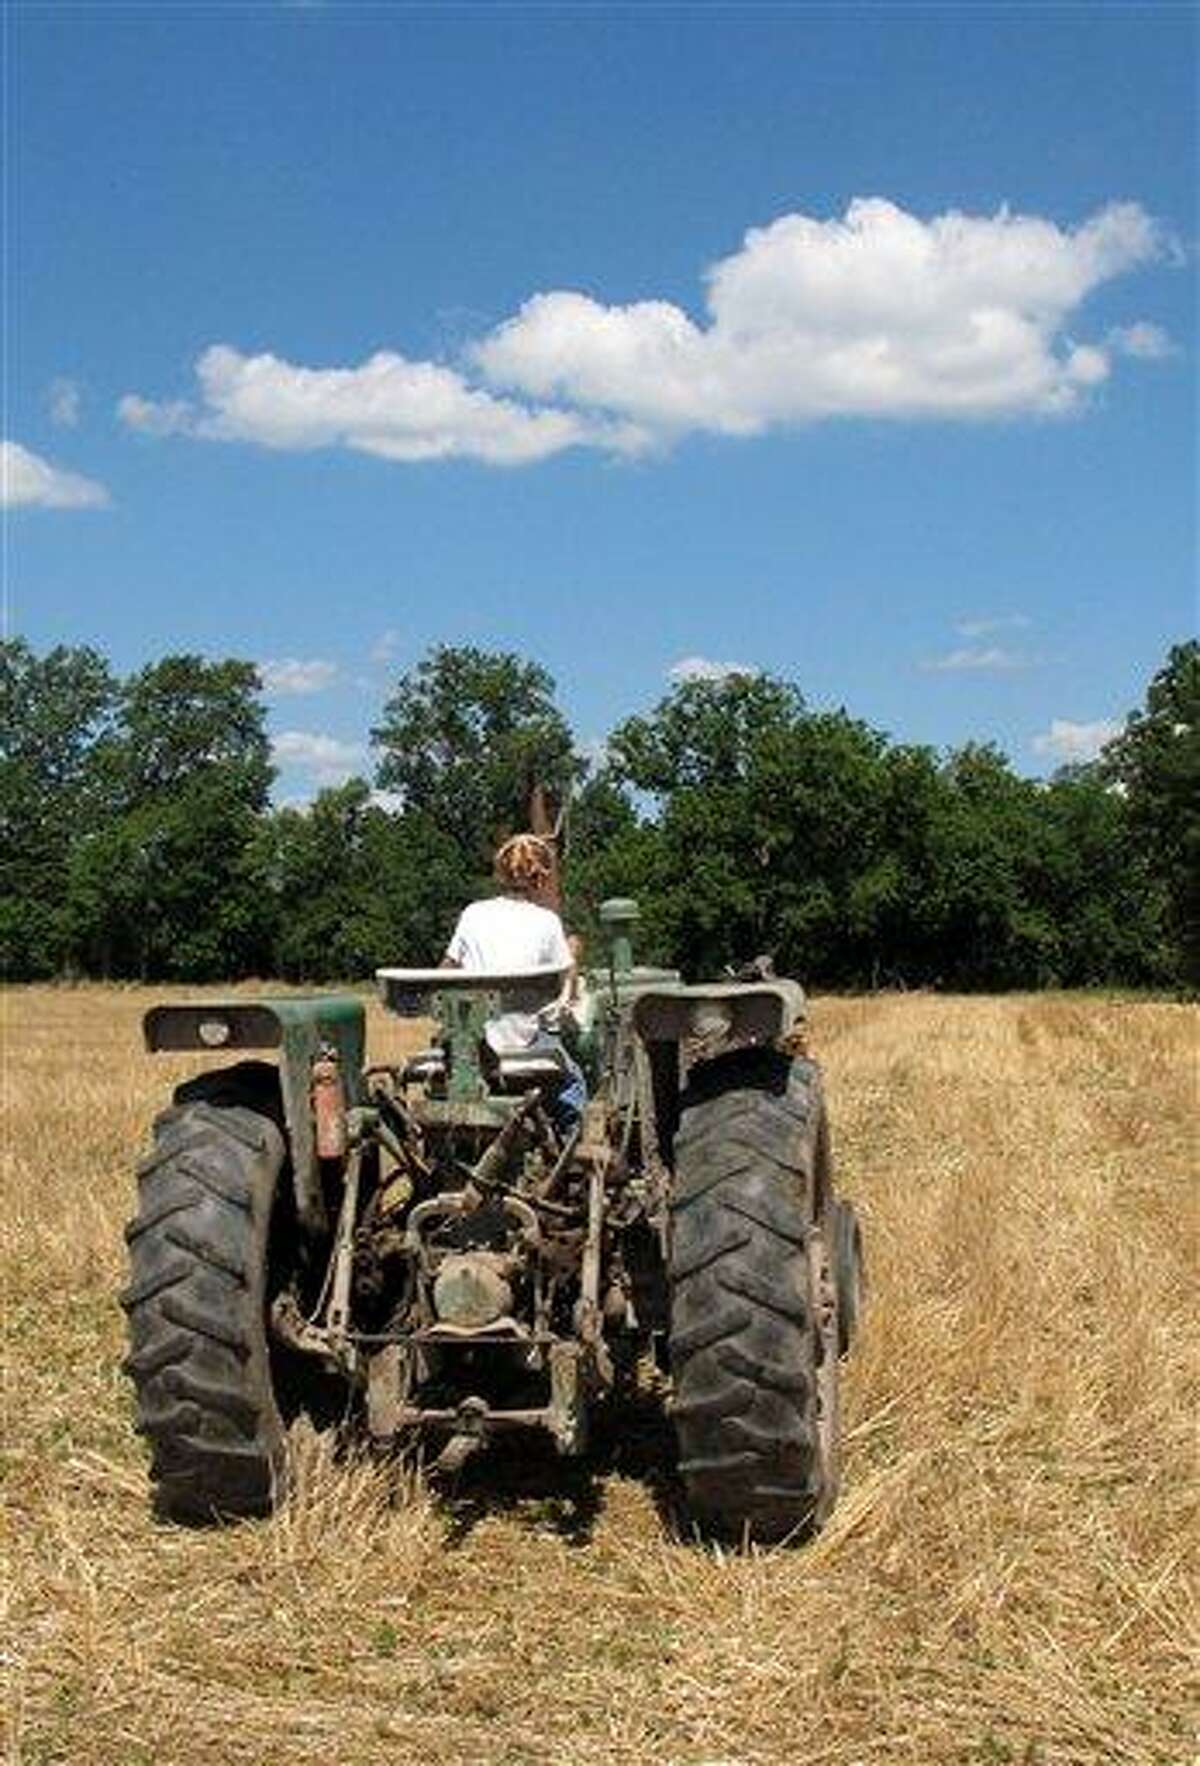 Jacob guides a tractor through a bean field June 20 on his grandparents' property near Fults, Ill. Associated Press